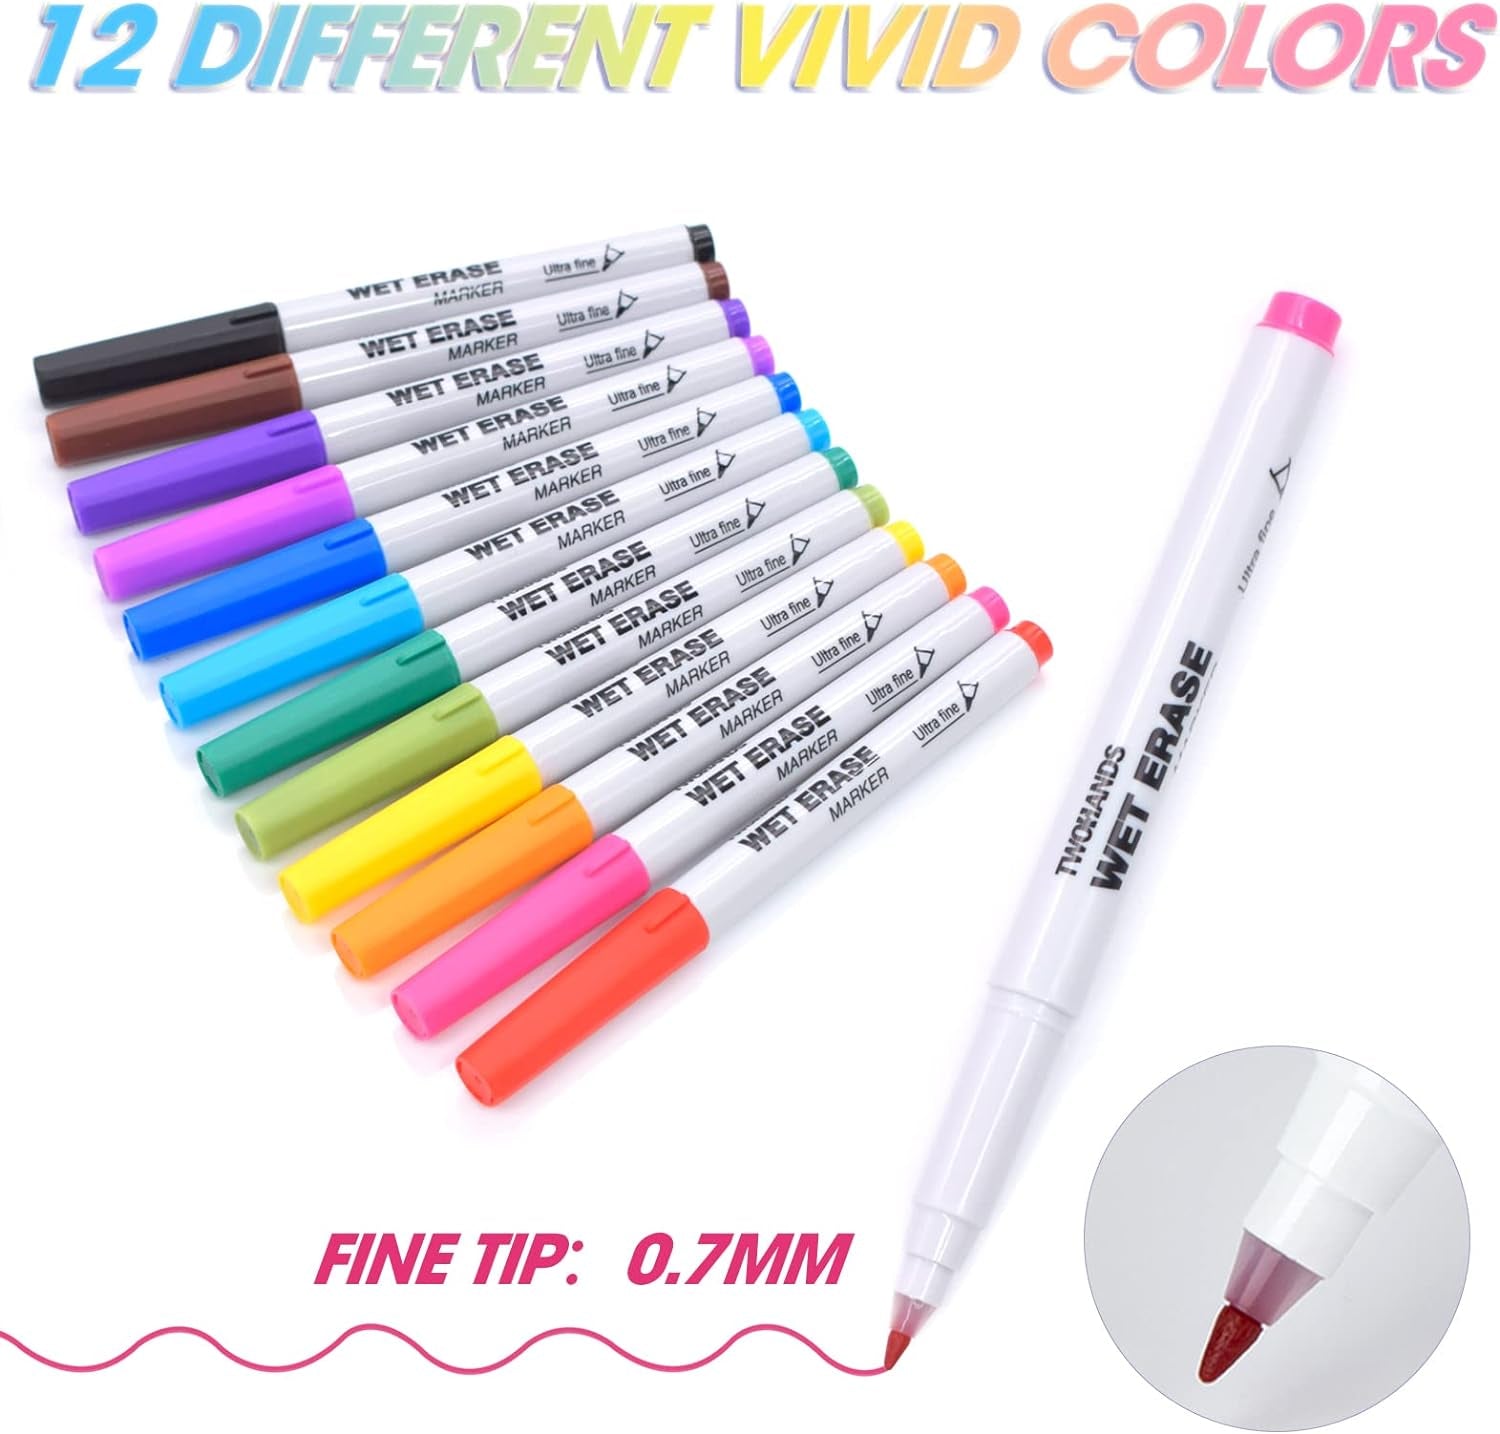 Wet Erase Markers Ultra Fine Tip,0.7Mm,Low Odor,Extra Fine Point,12 Assorted Colors,Whiteboard Markers for Office,Home,Or Planning Dry Erase Board,20703